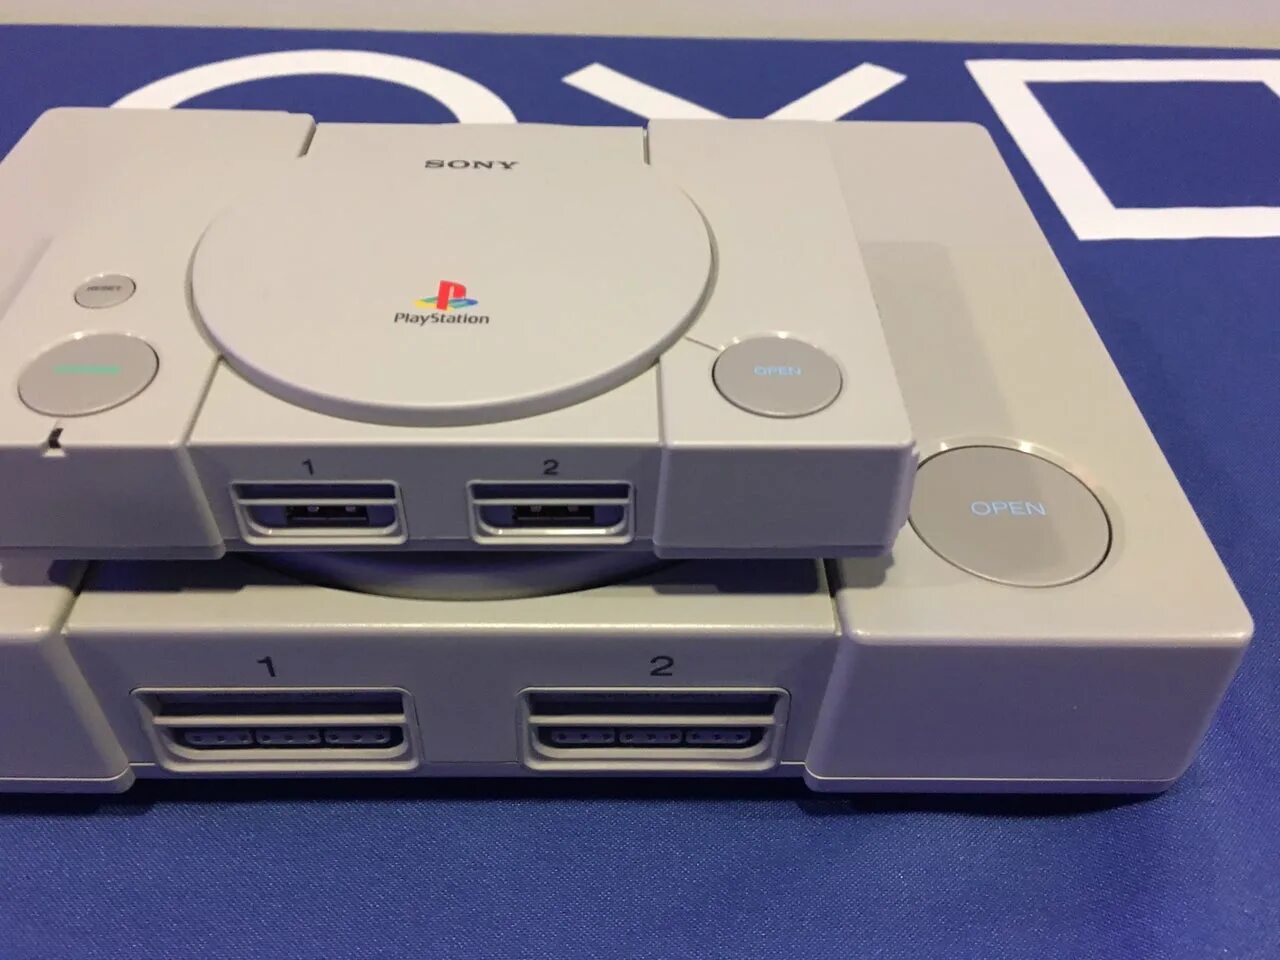 Playstation ps1. Sony ps1 Classic. Сони ПС 1. PLAYSTATION 1 Classic. Ps2 Classic Mini.